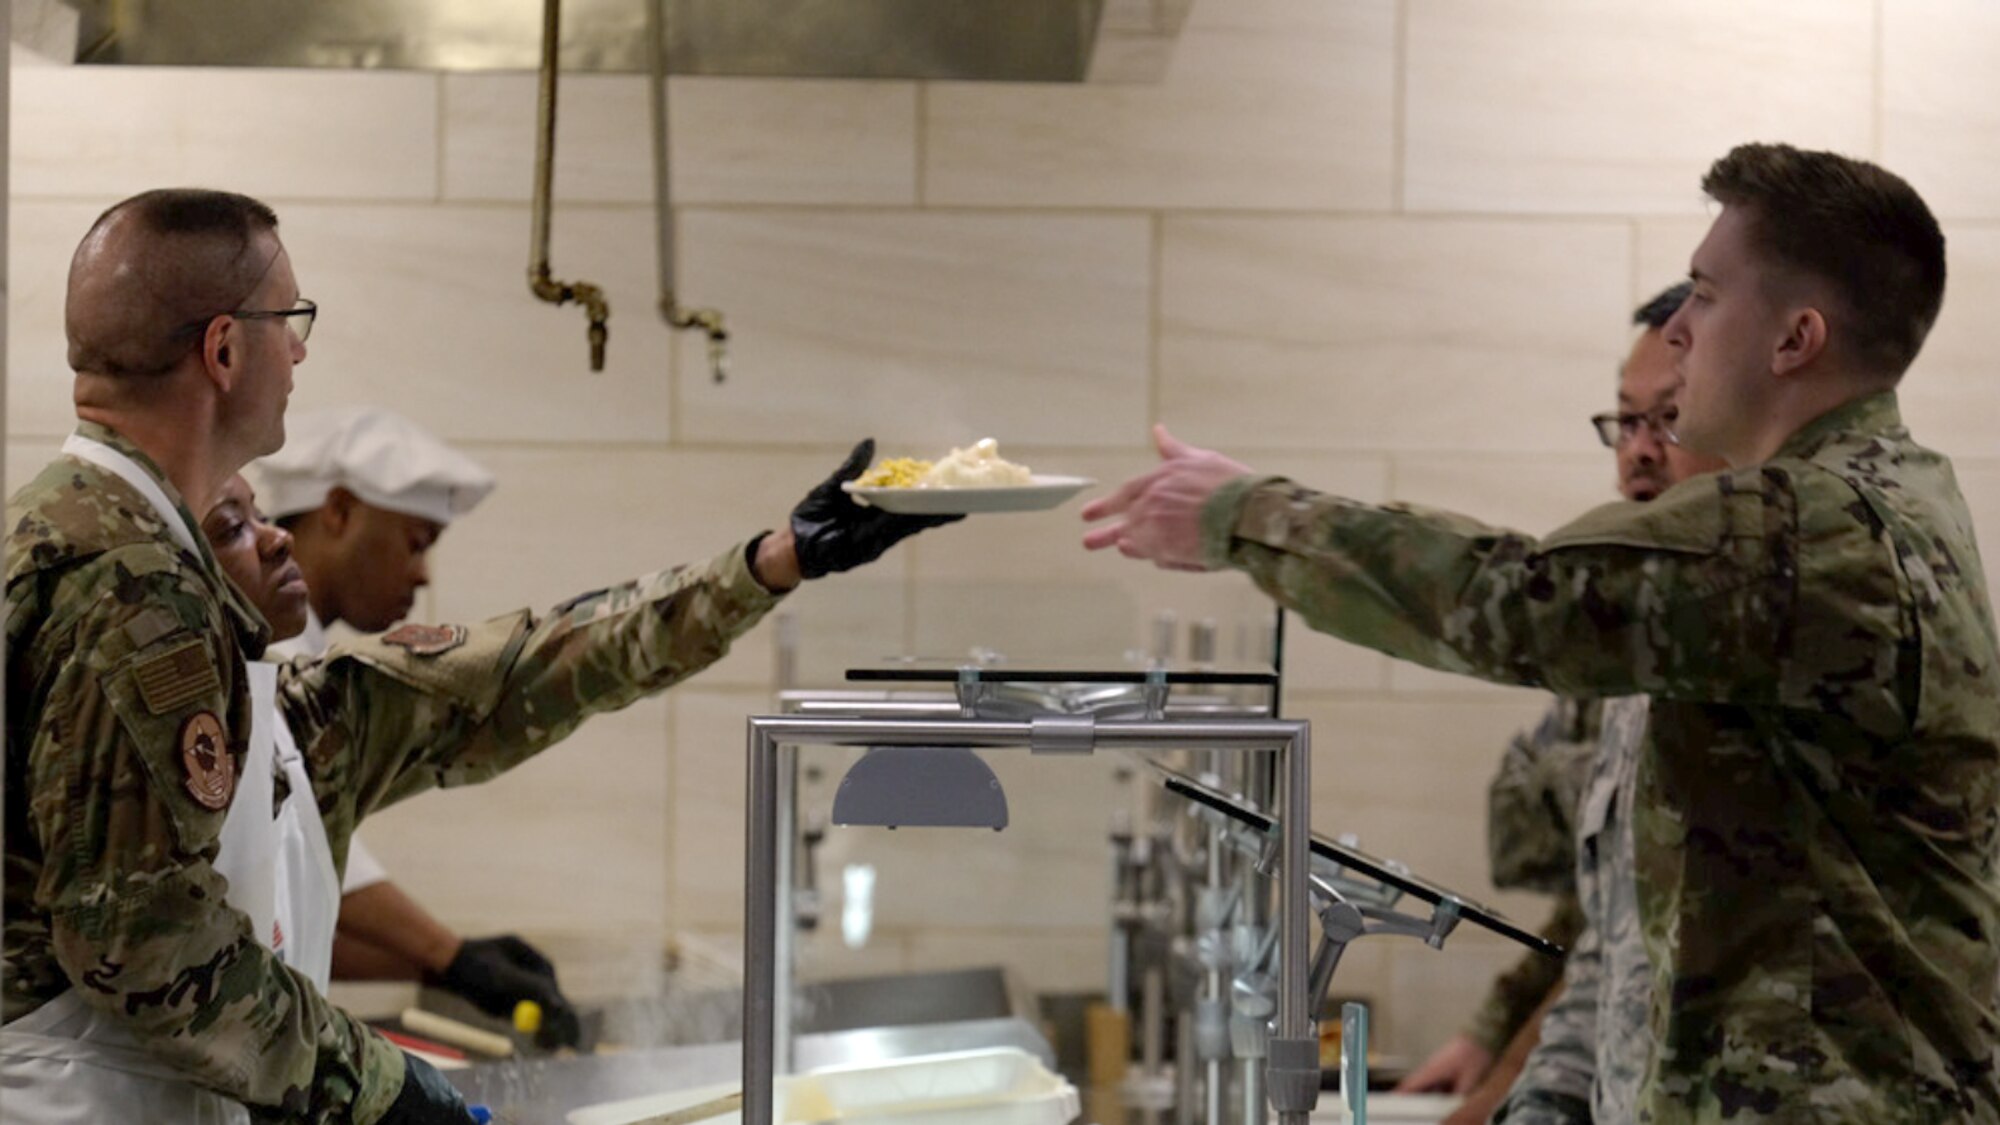 Col. Phil Heseltine, 931st Air Refueling Wing commander, and Chief Master Sgt. Takesha Williams, 931st ARW command chief and 507th Air Refueling Wing budget analyst, serve lunch to Team McConnell Airmen June 1, 2019, in the Chisholm Trail Dining Facility on McConnell Air Force Base, Kan.